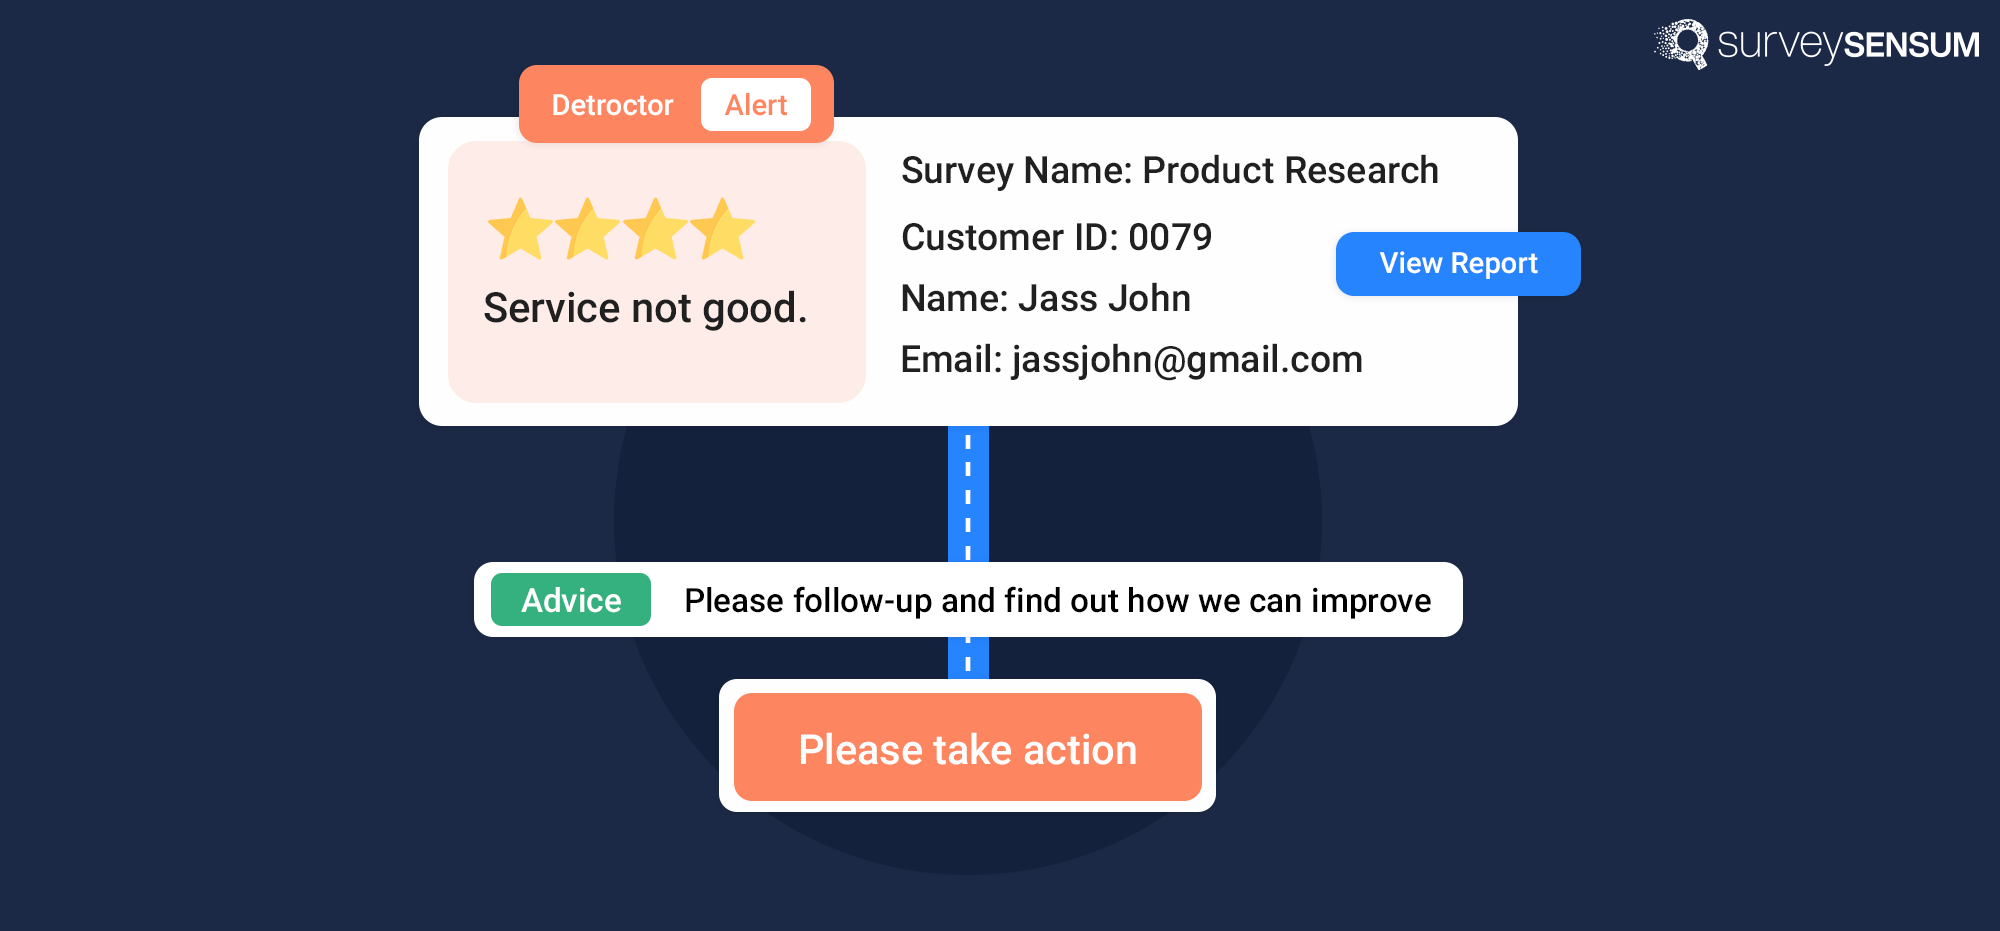 An image showing an example of closing the feedback loop